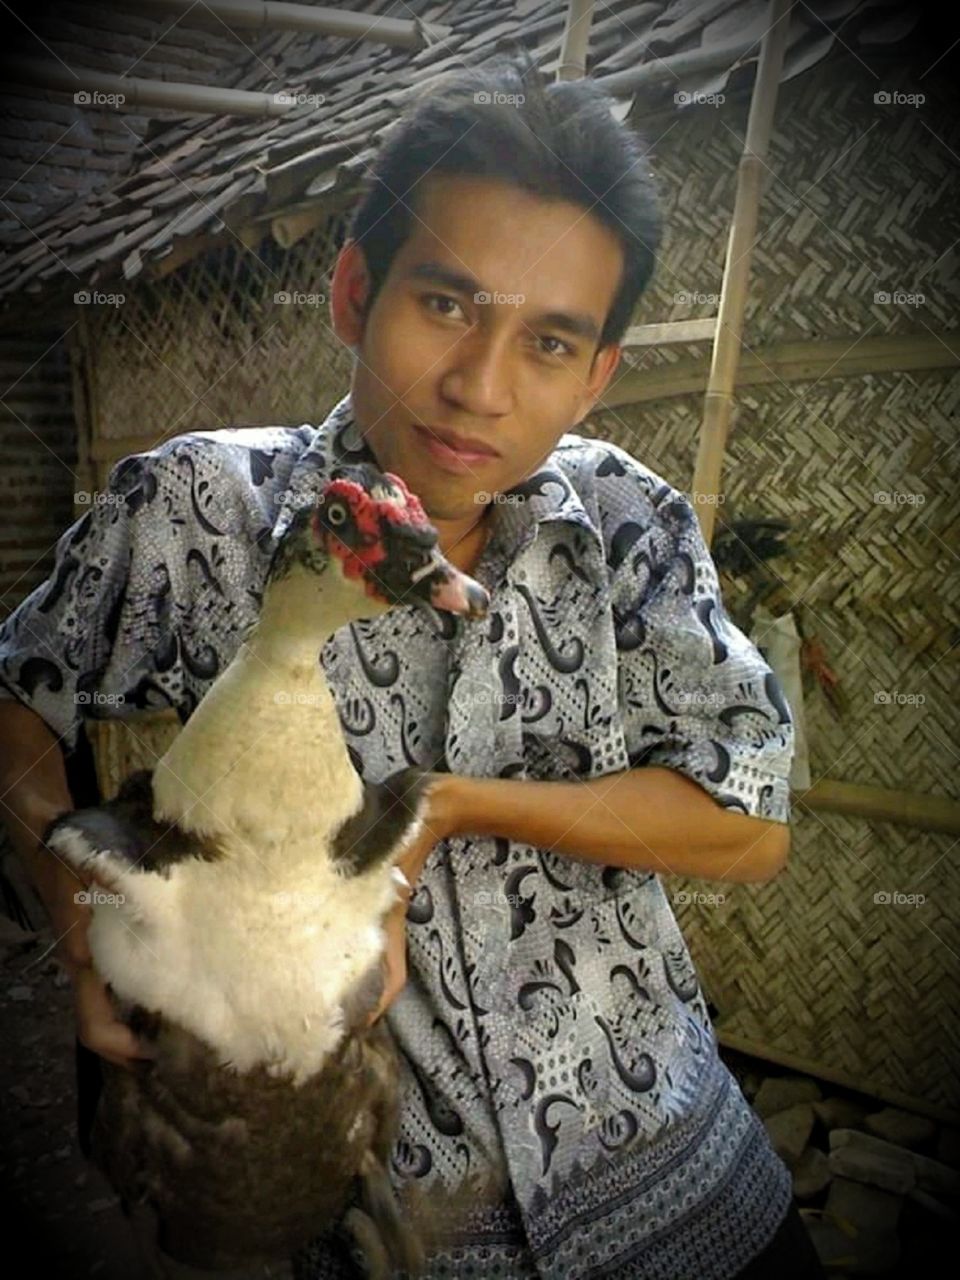 Celebrating Holiday with pet
This duck is my lovely pet that every day play with me.
@saifur.rasi